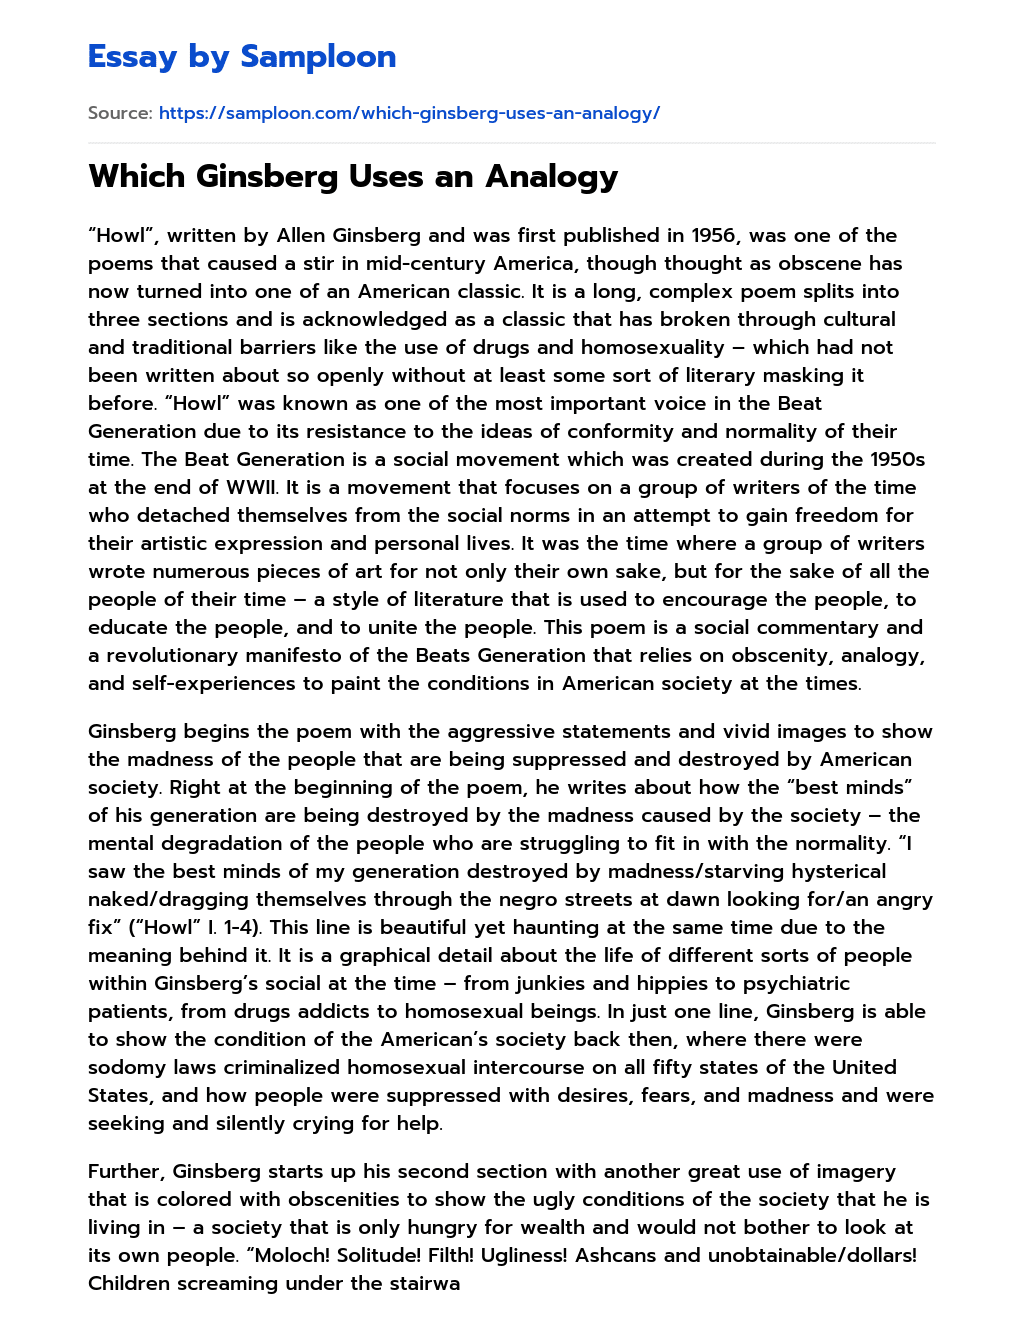 Which Ginsberg Uses an Analogy essay